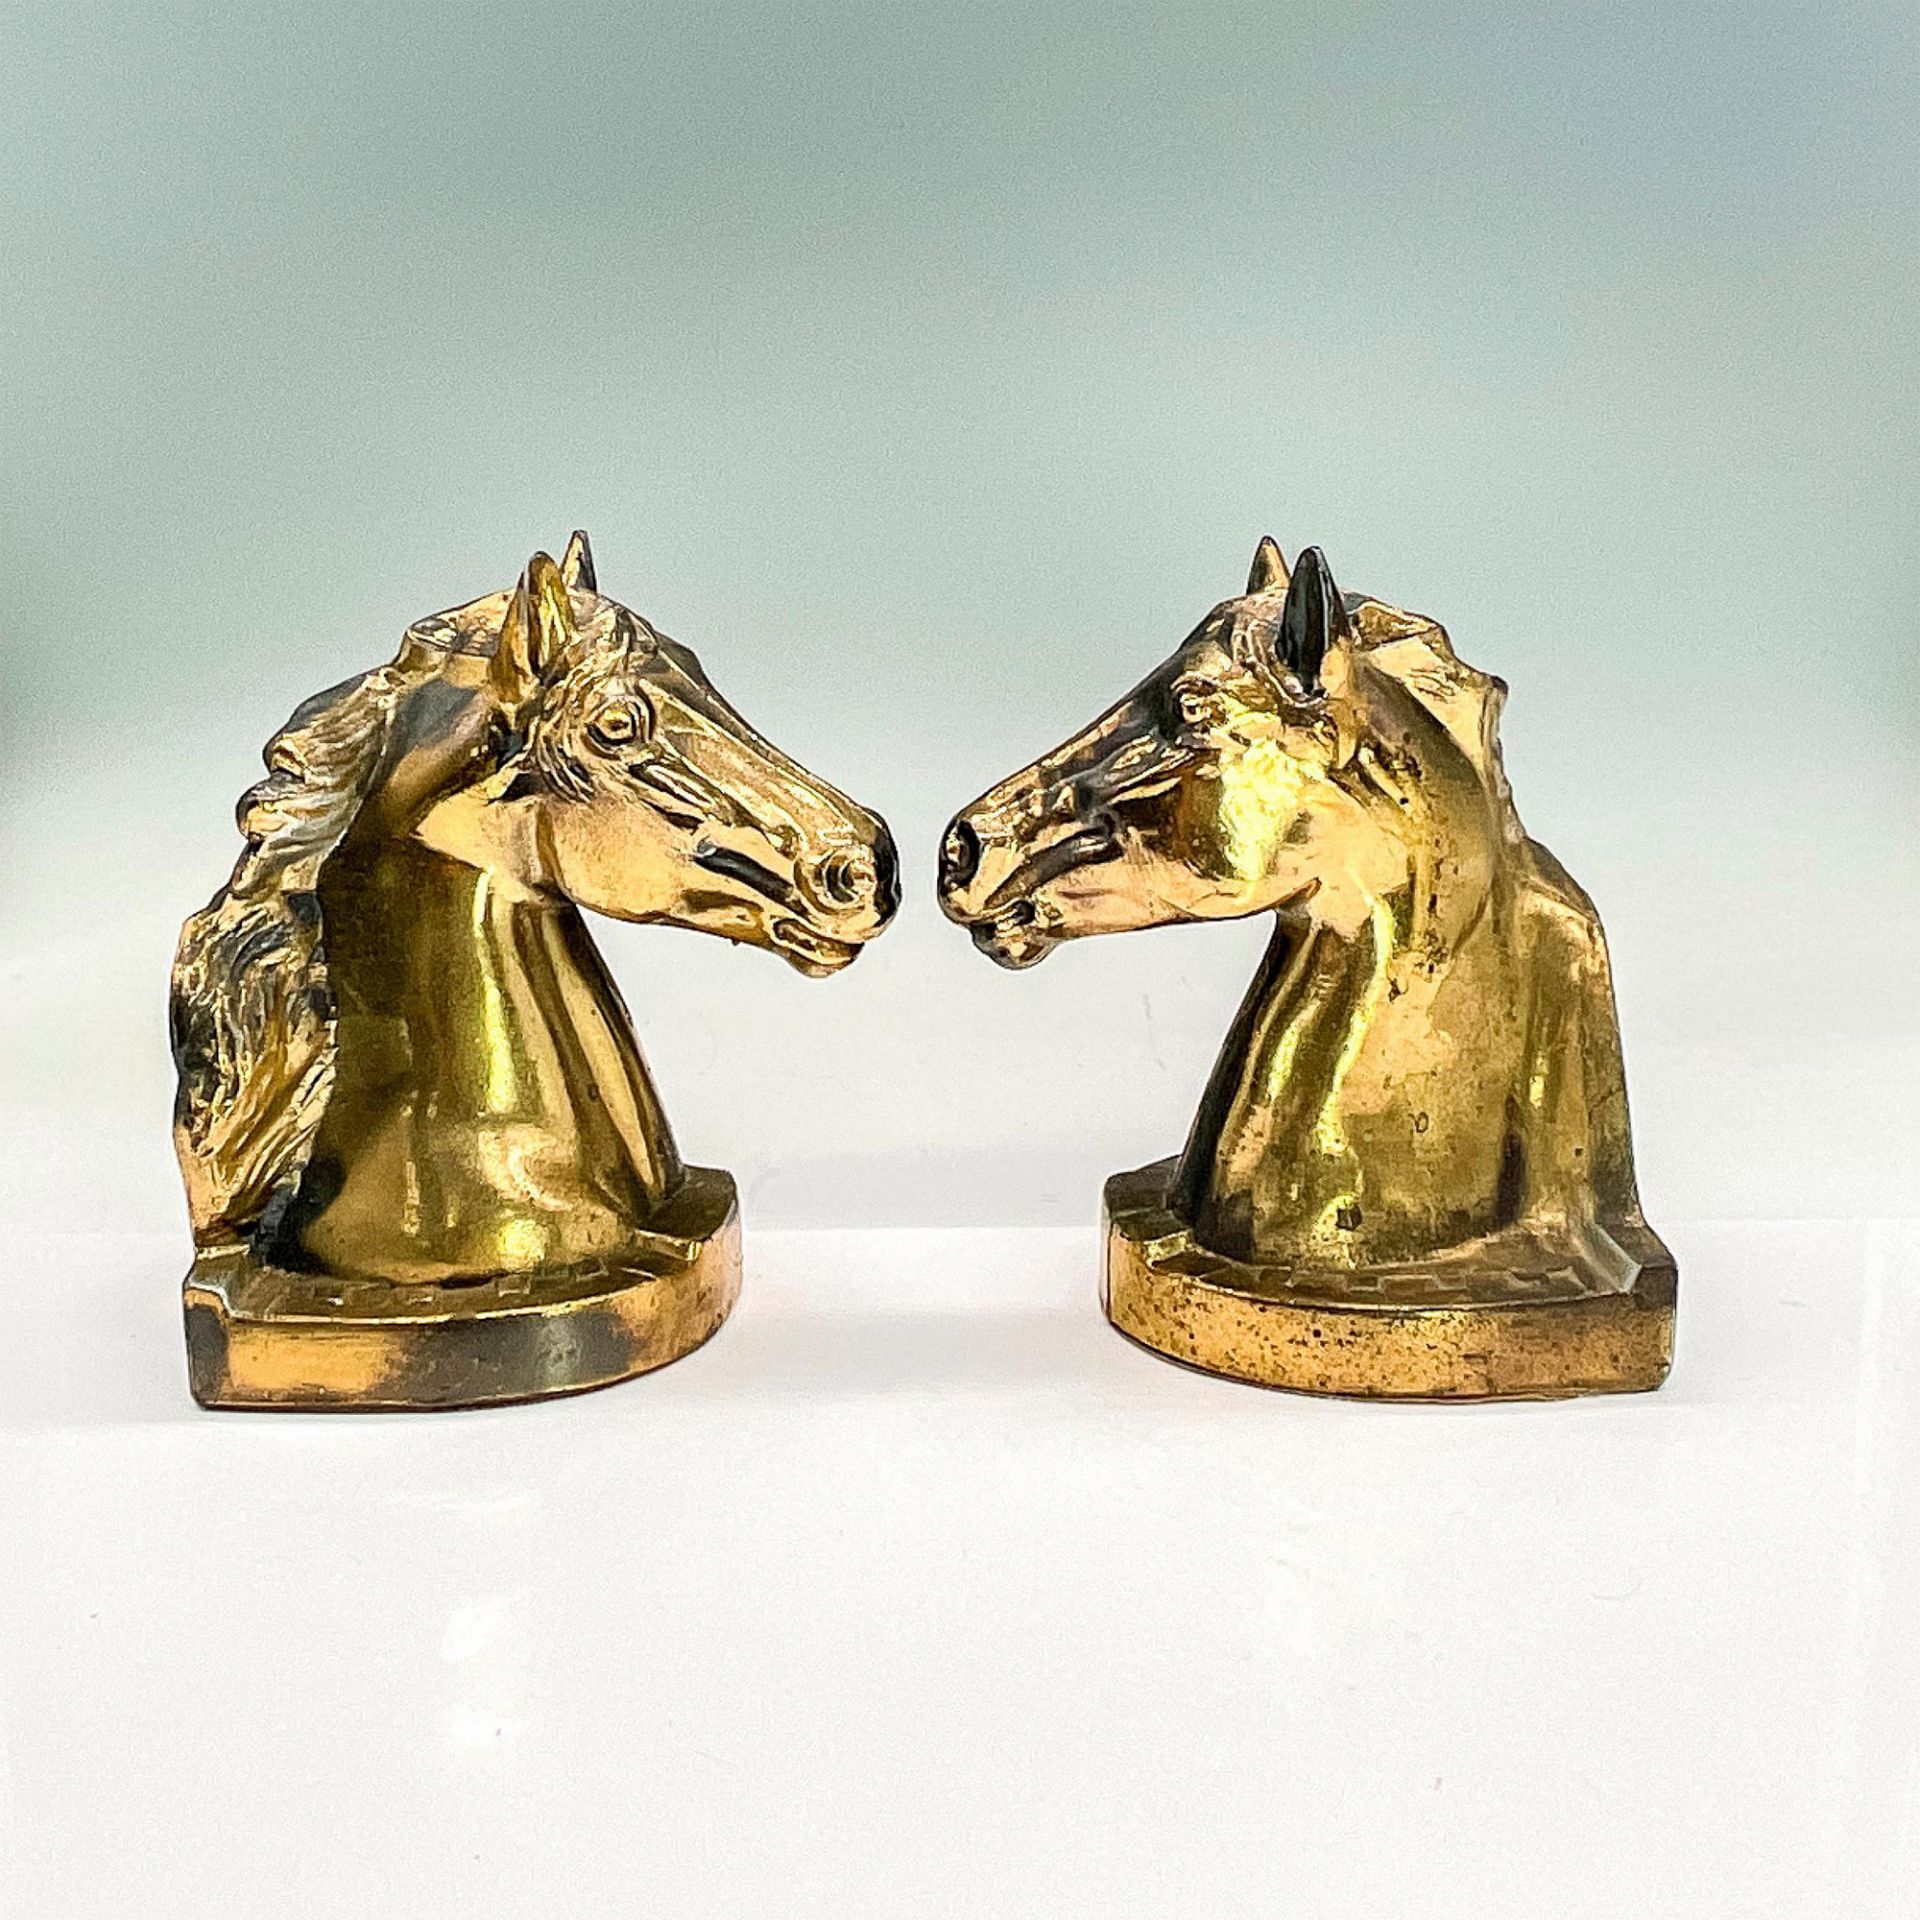 2pc Vintage Brass Bookends, Horsed Busts - Image 2 of 3